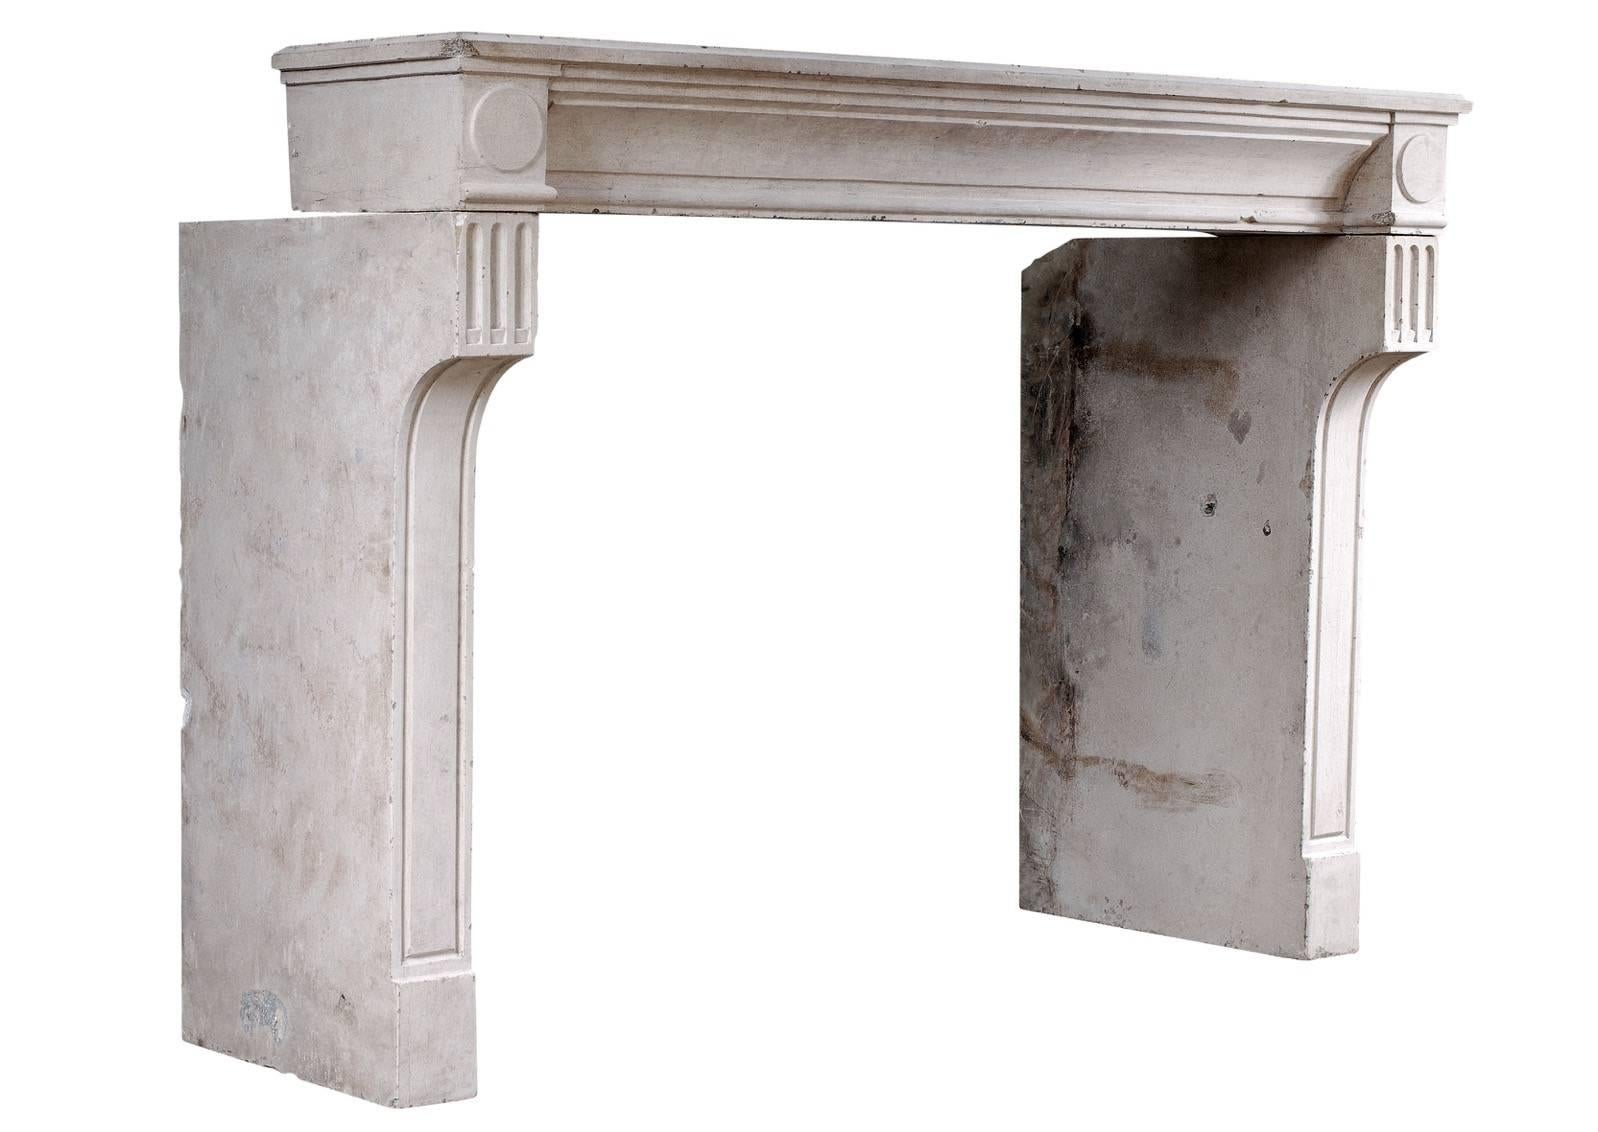 A rustic 18th century French Louis XVI limestone fireplace. The concave panelled frieze flanked by round end blockings, the deep, shaped panelled jambs with flutes above. Jambs intentionally left deep but could be reduced if required.

Measures: